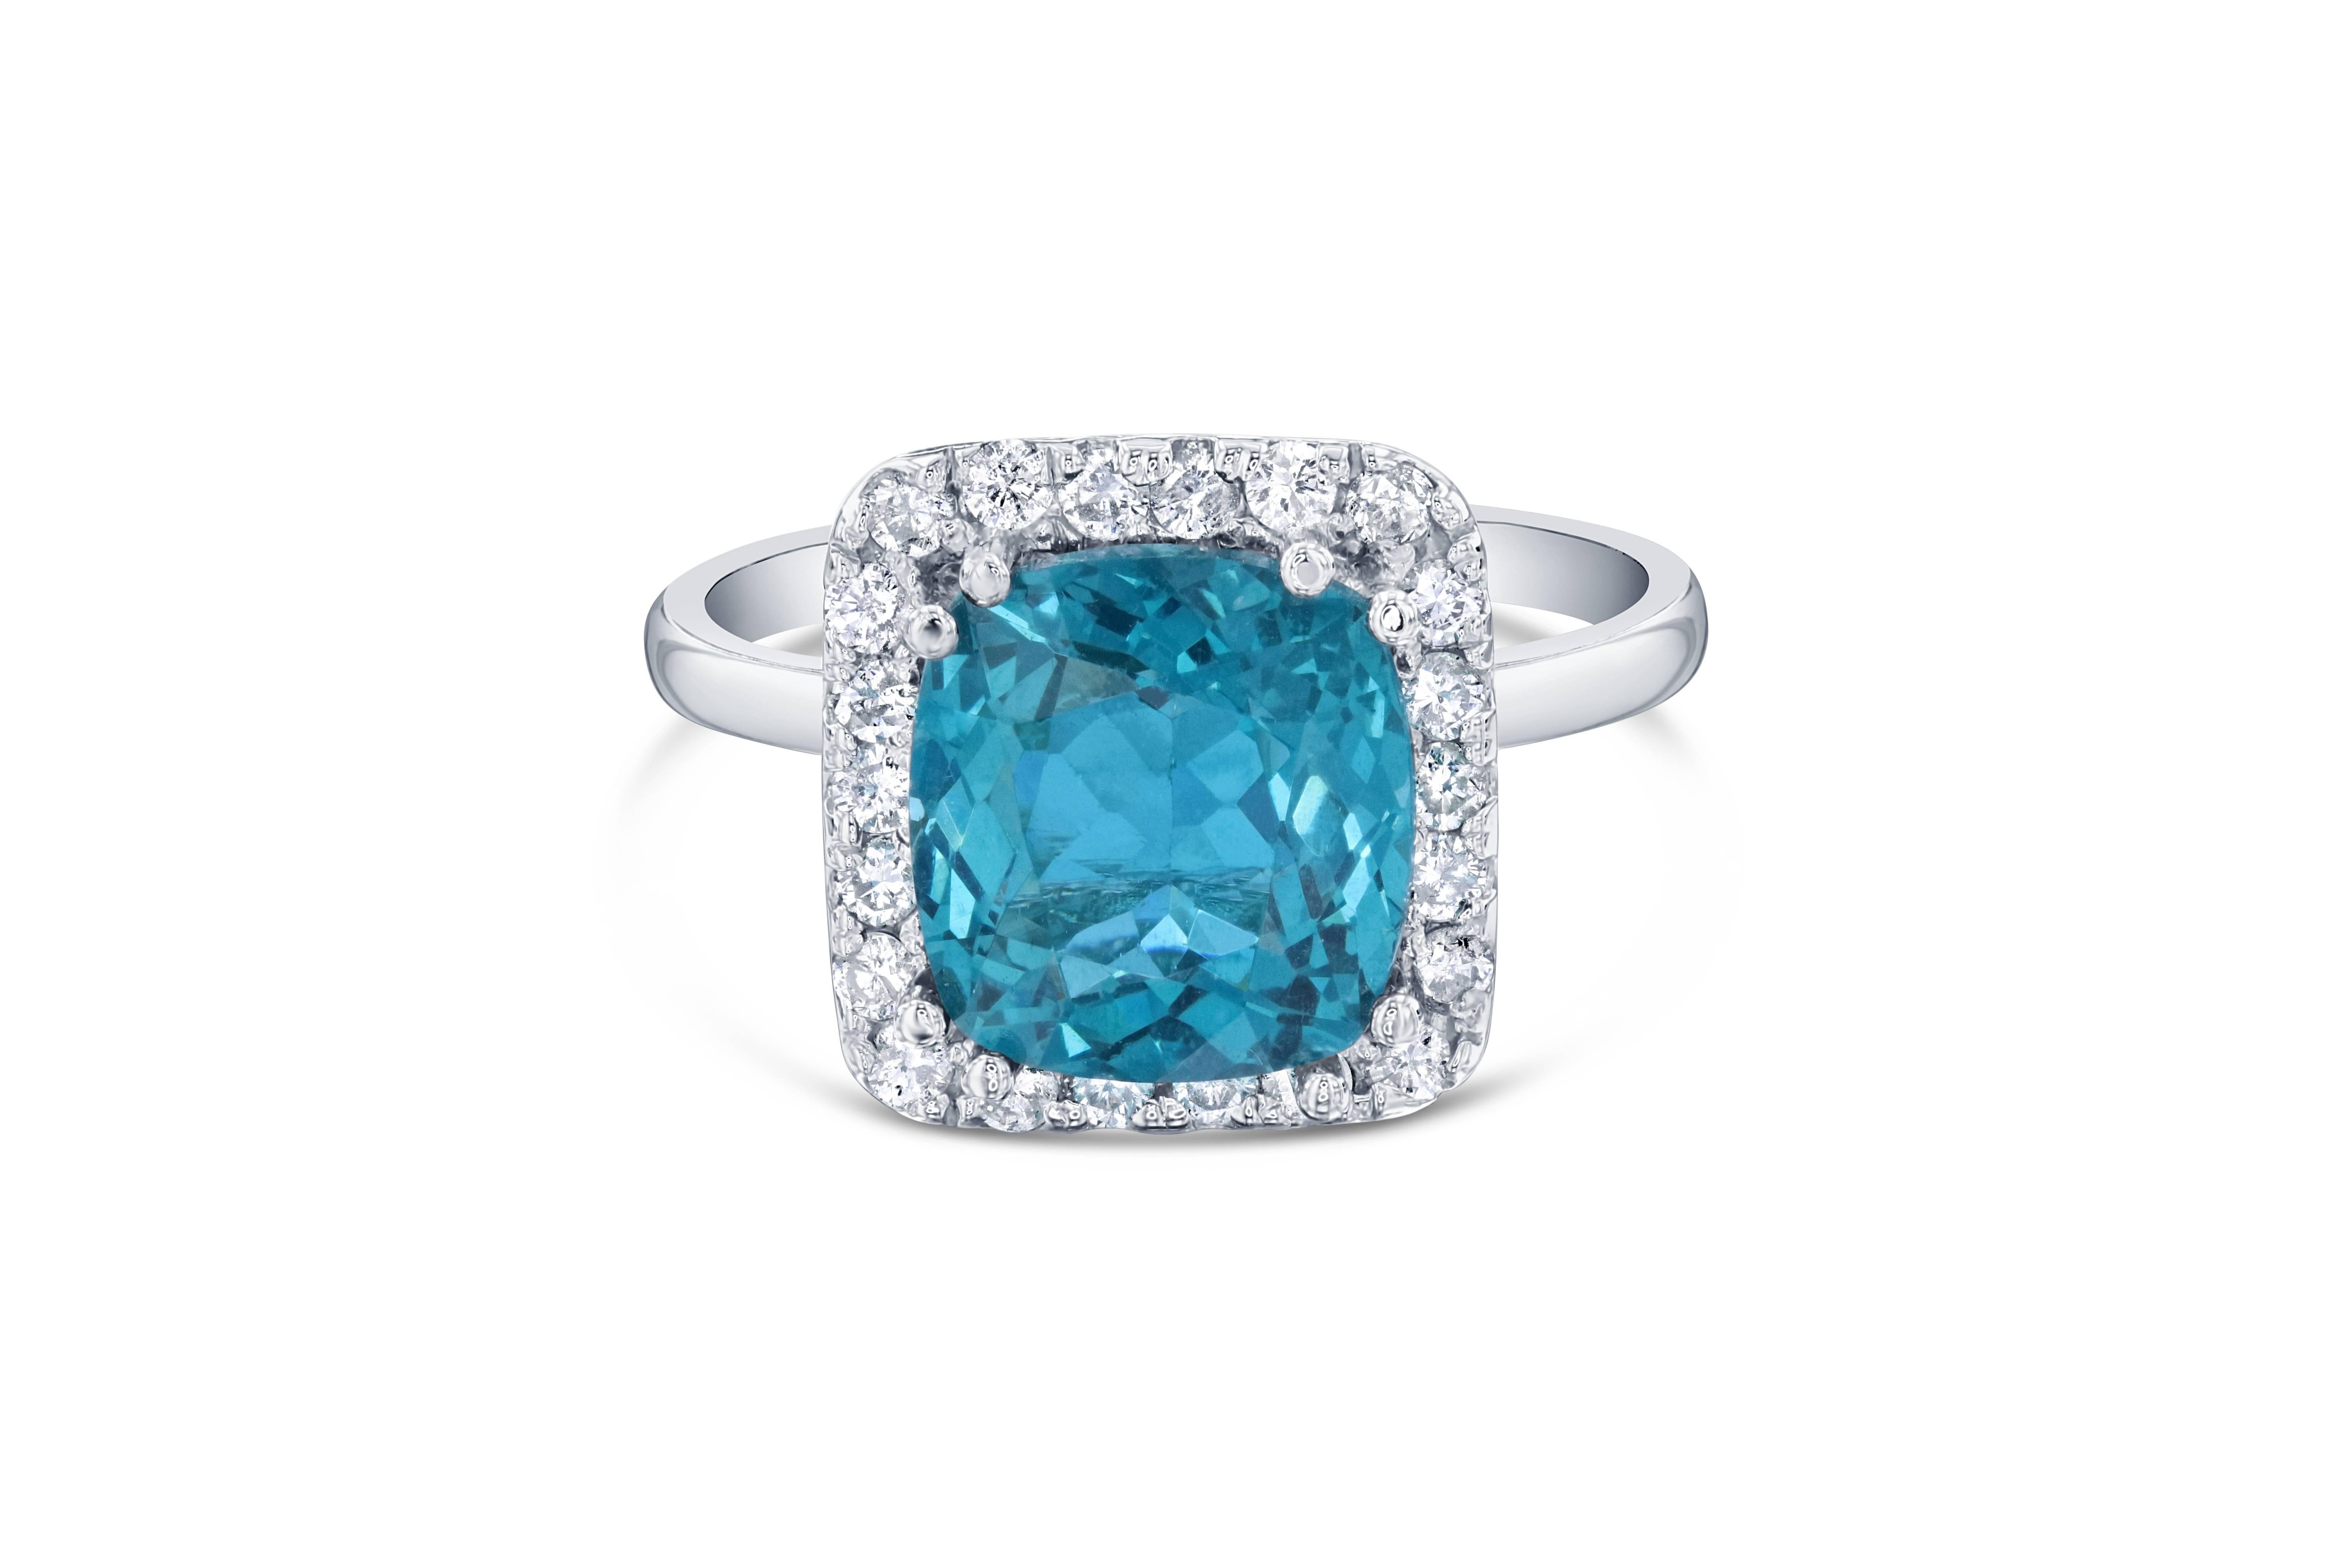 Gorgeous Halo Apatite and Diamond Ring.  This ring has a 3.71 carat cushion cut Apatite in the center of the ring and is surrounded by 22 Round Cut Diamonds that weigh 0.41 carat Clarity: SI2, Color:F.  The total carat weight of the ring is 4.12